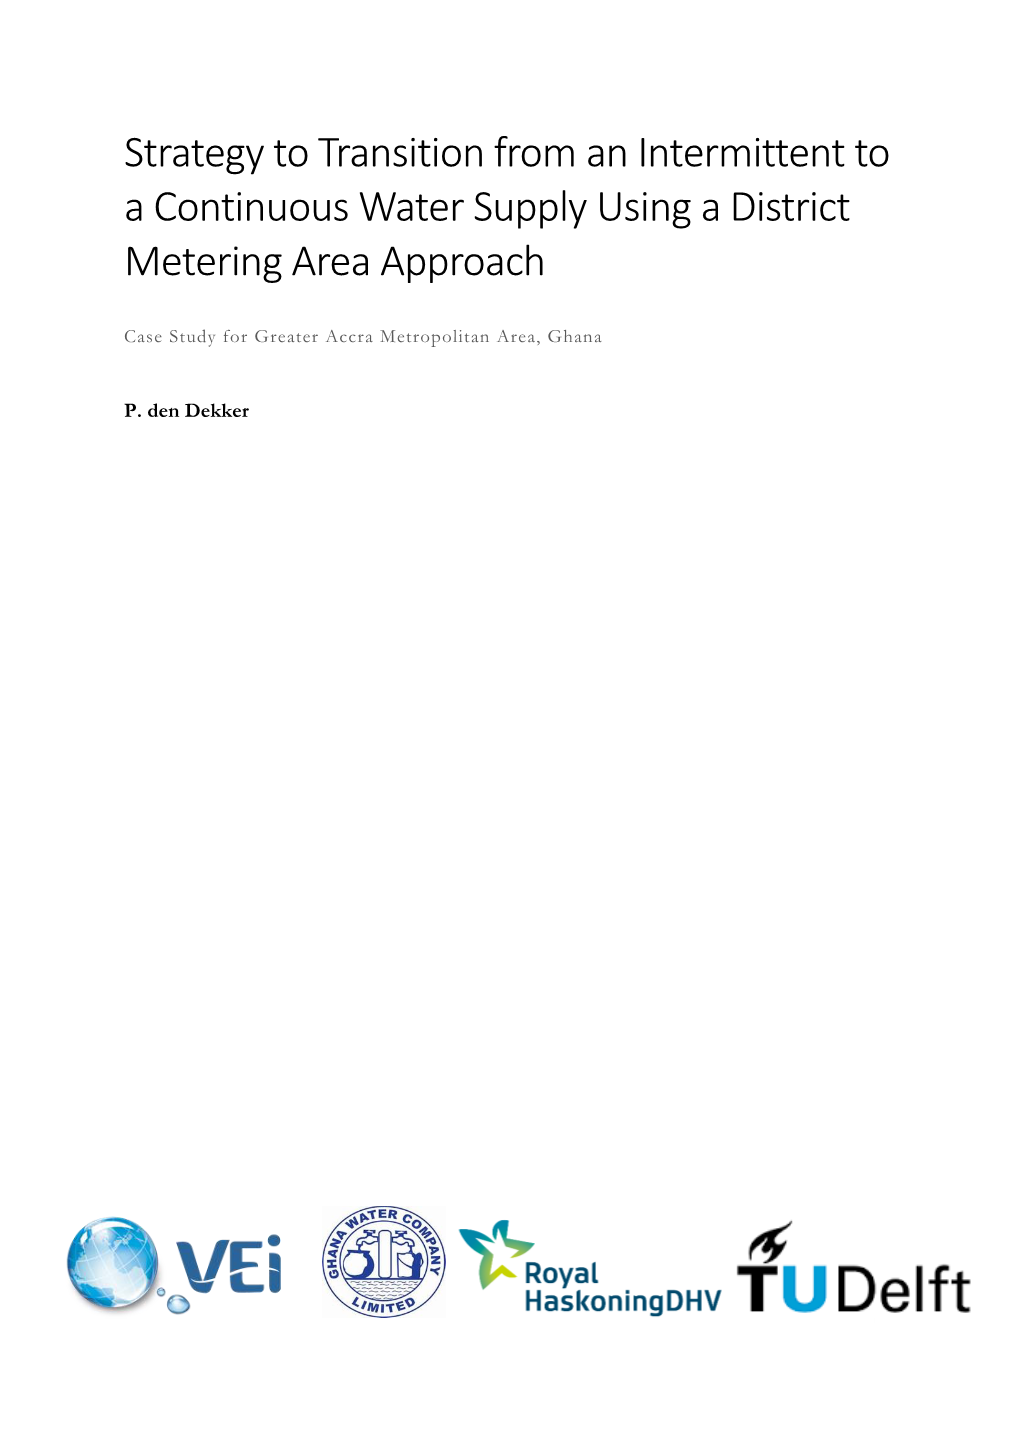 Strategy to Transition from an Intermittent to a Continuous Water Supply Using a District Metering Area Approach